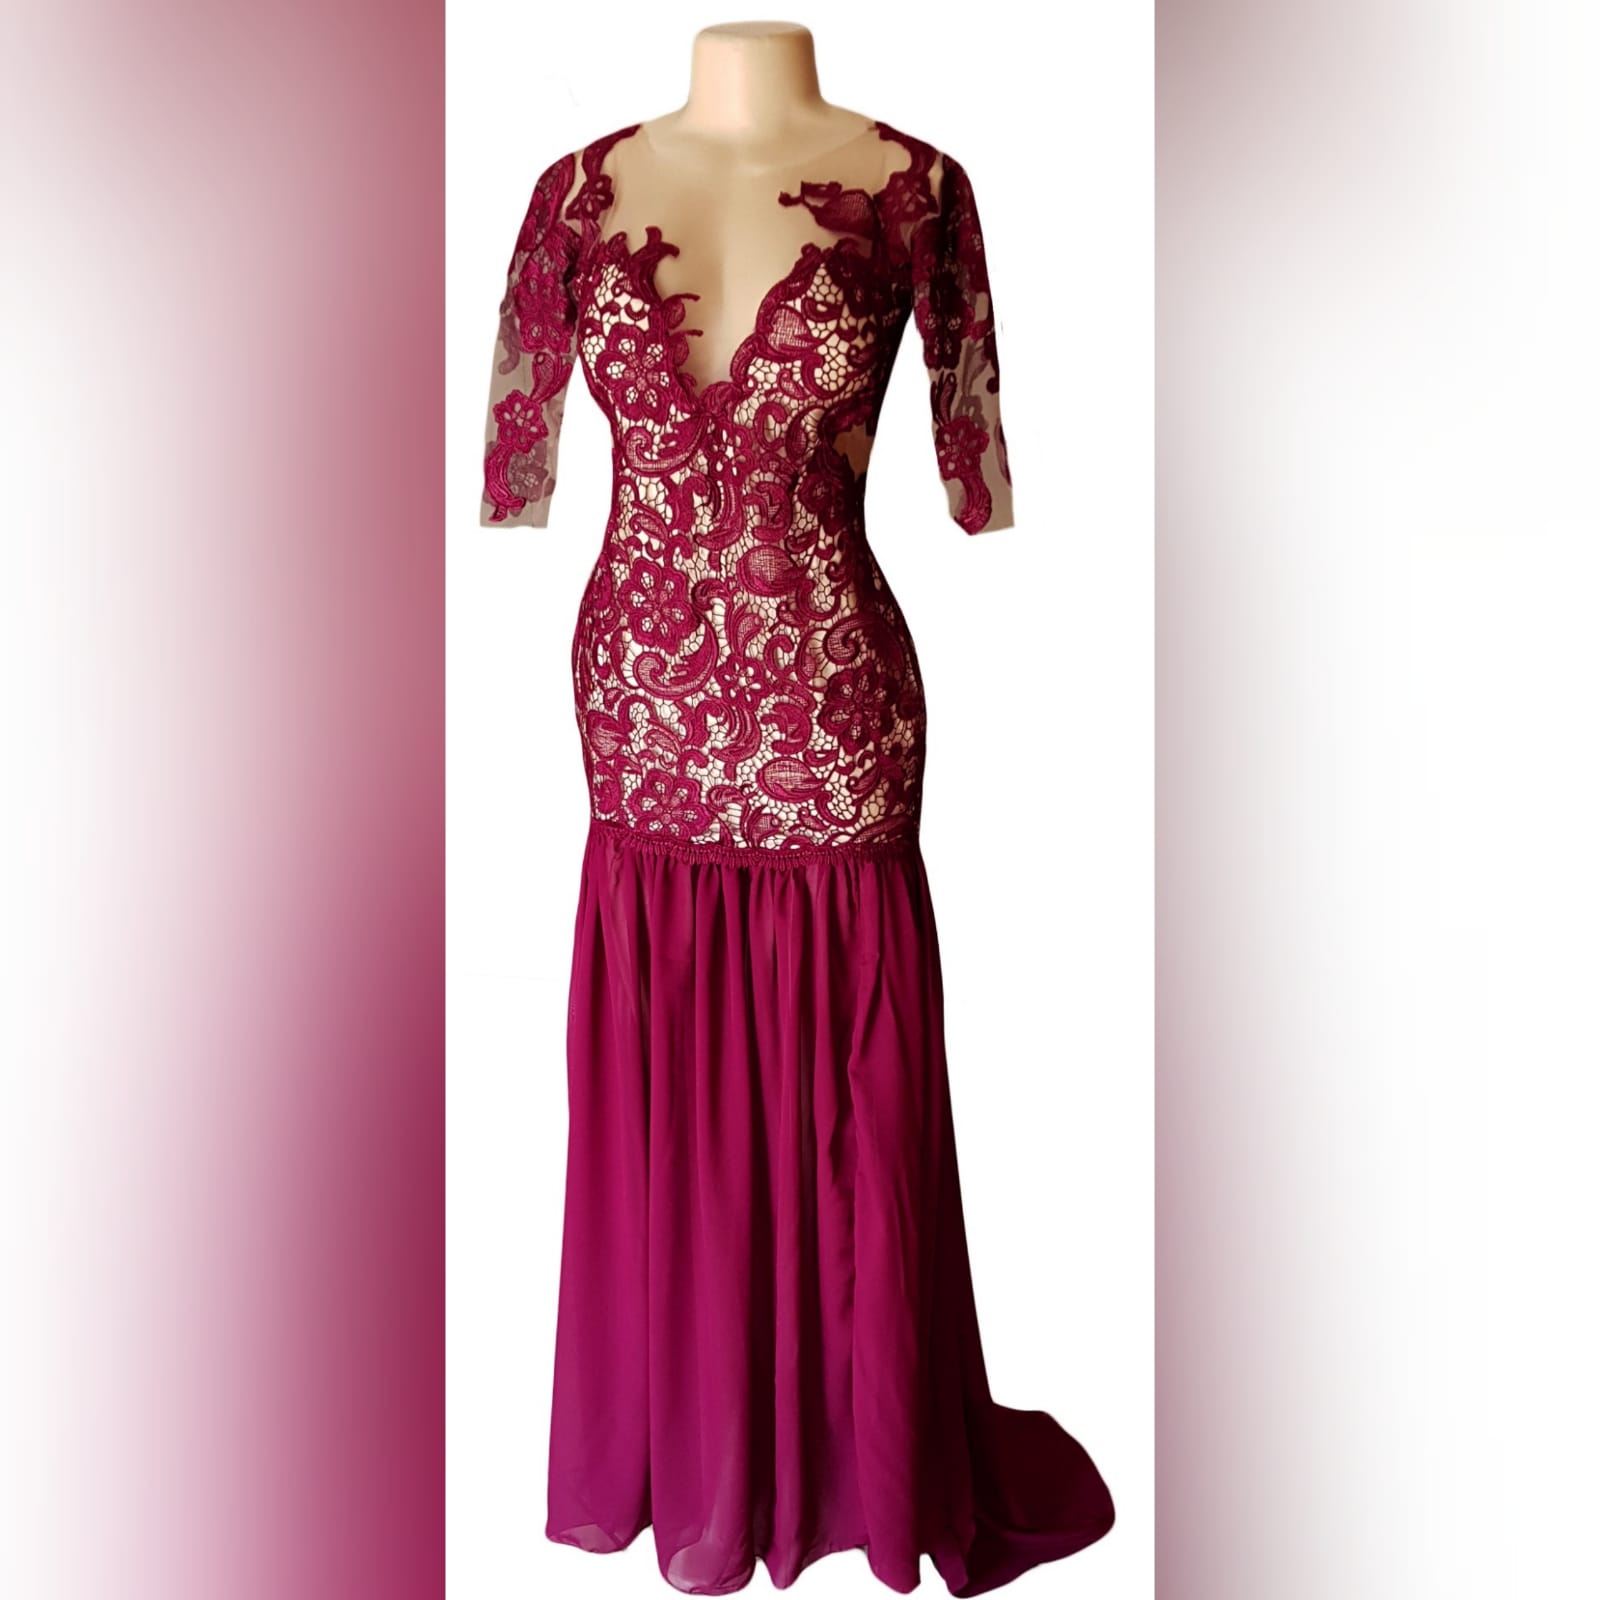 Tight to the hip burgundy & nude lace prom dress 1 burgundy & nude lace prom dress, fitted to the hip, with sheer flowy legs, with a slit and a train. Rounded illusion open back and plunging neckline with 3/4 sleeves.